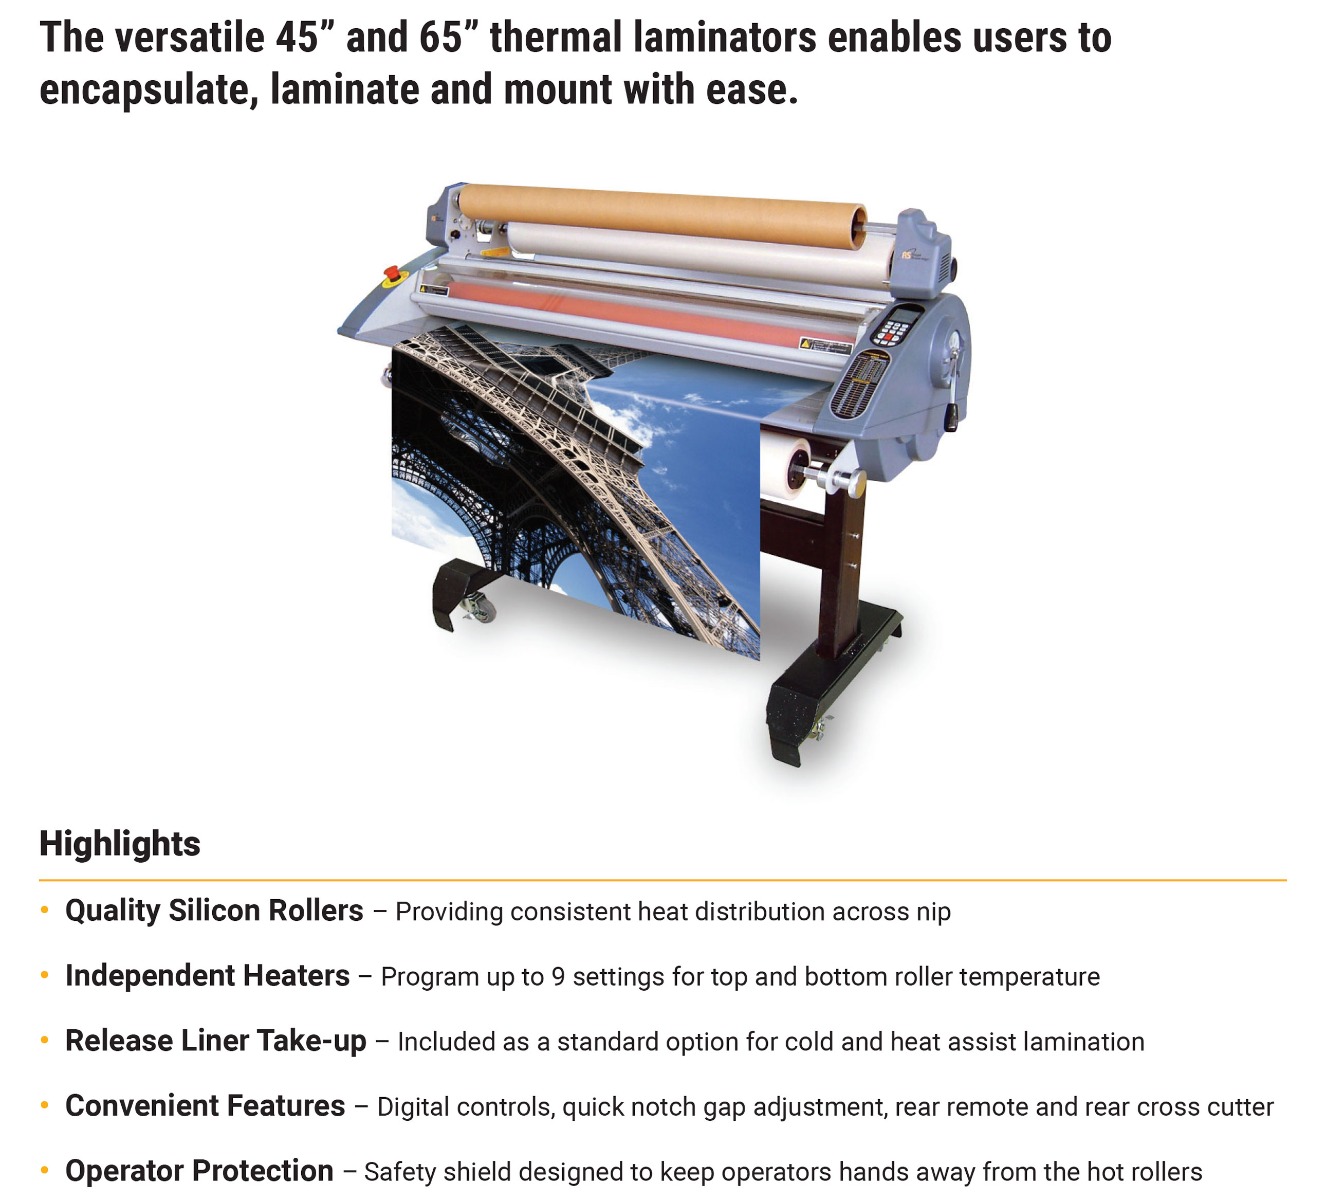 royal sovereign rsh-1151 thermal laminator features quality silicon rollers independent heaters with 9 settings release liner take up safety features